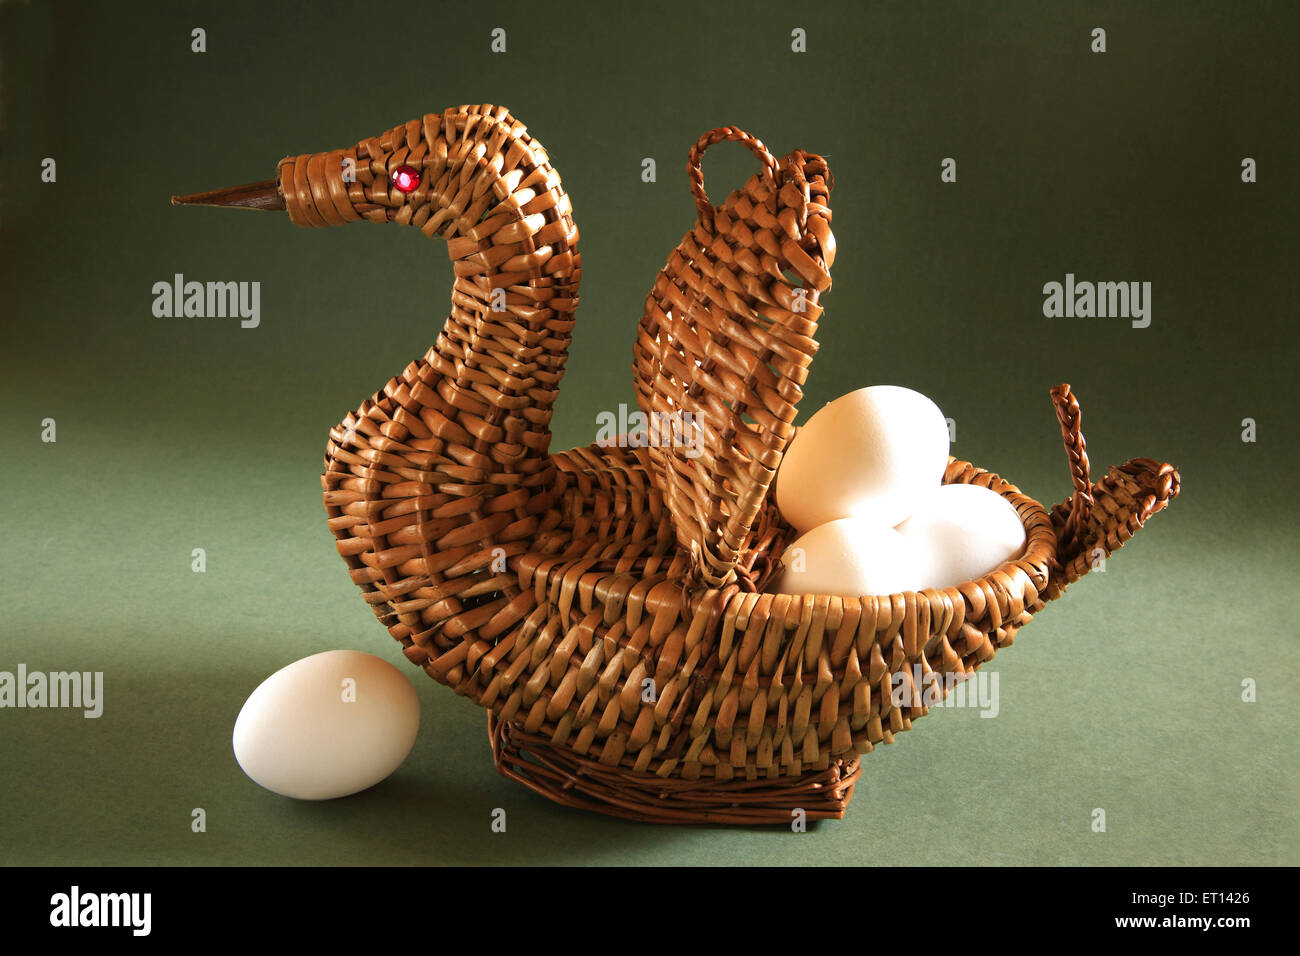 Artistic cane basket shape of duck with eggs on green background Stock Photo